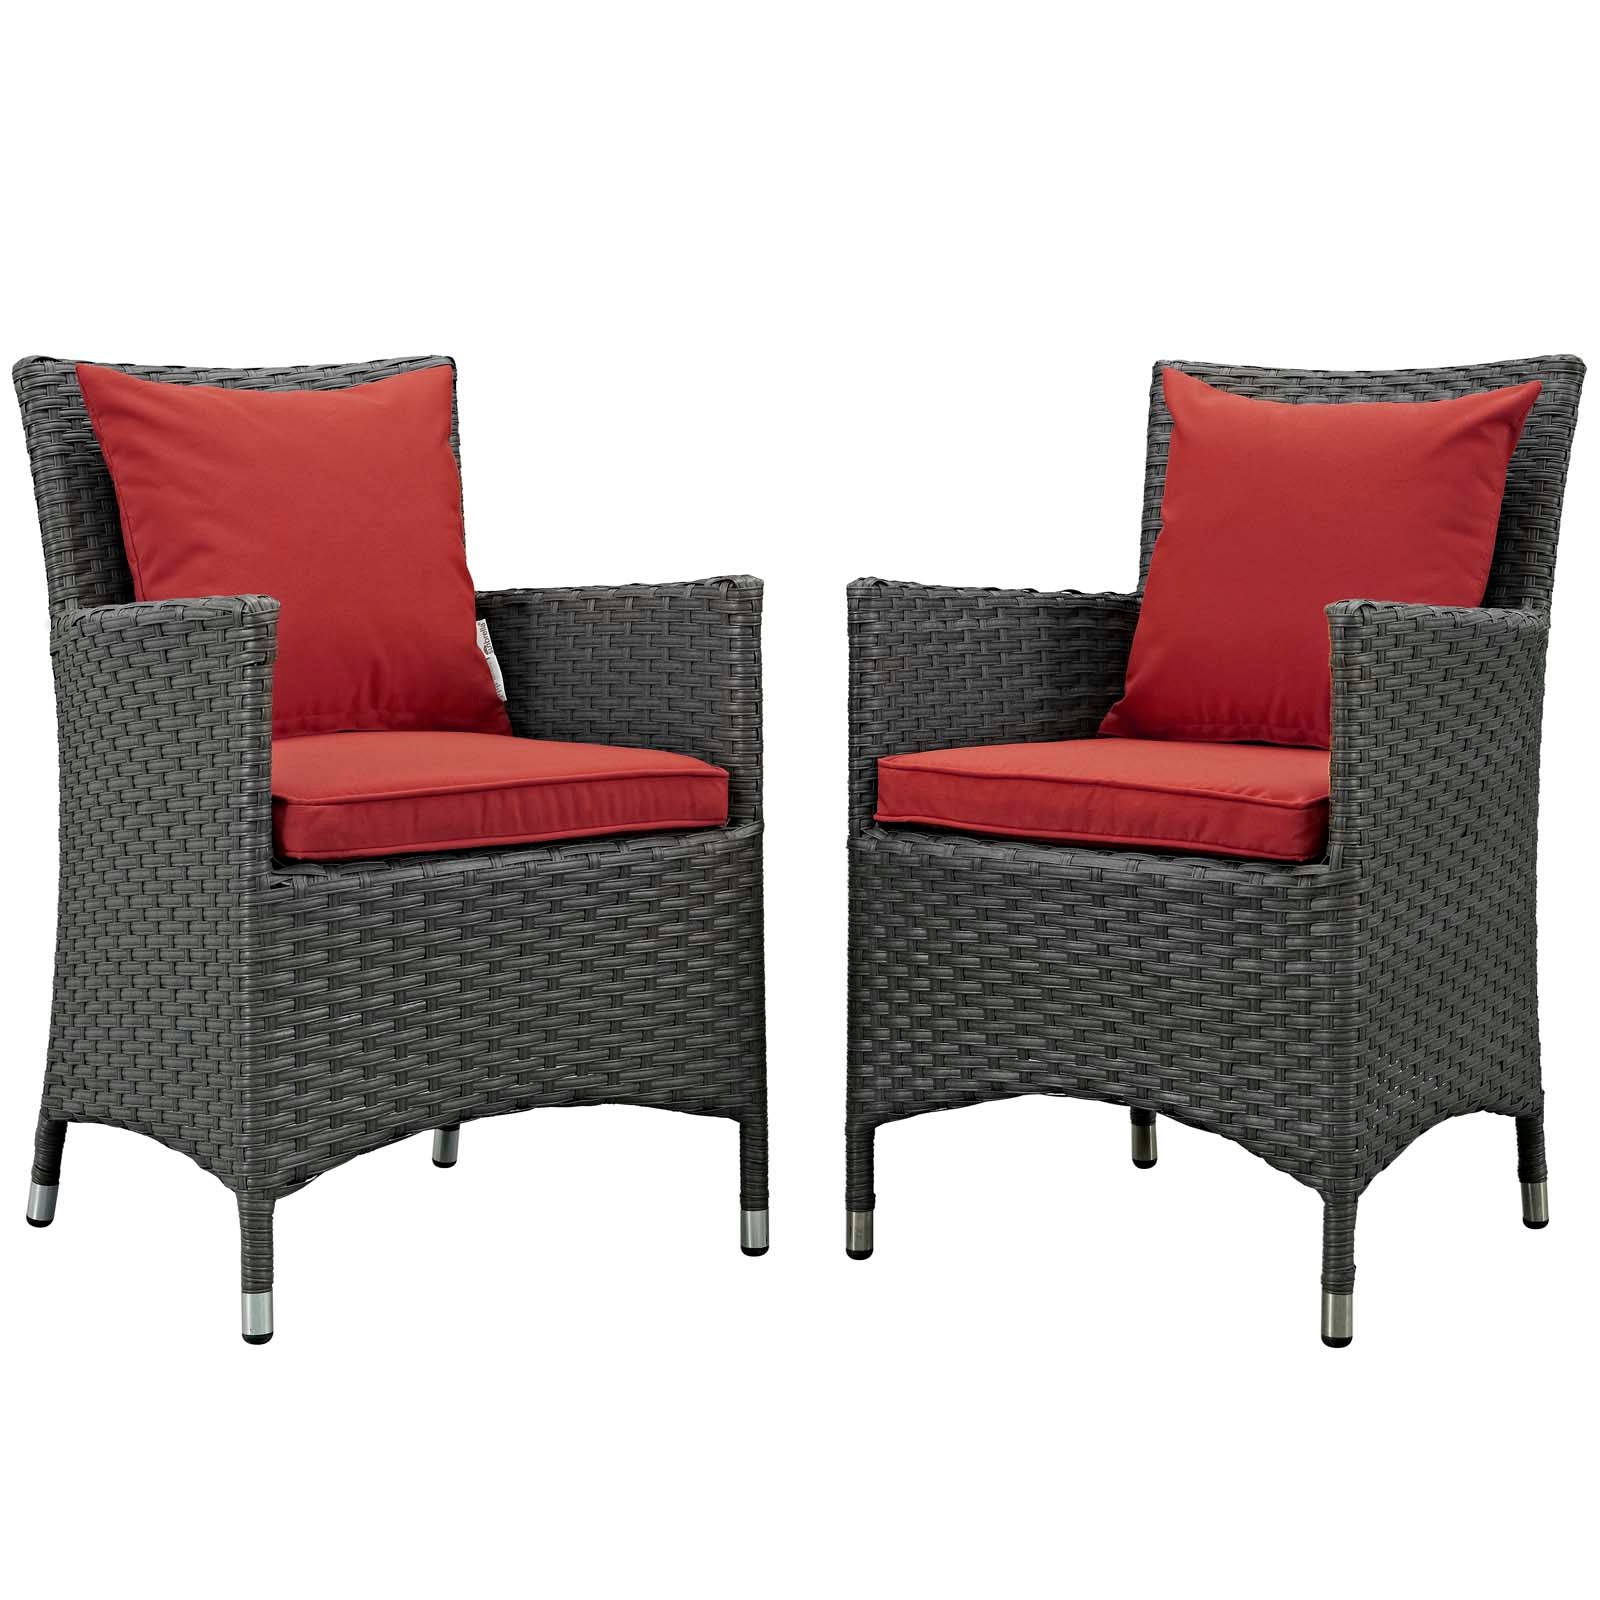 Sojourn 2 Piece Outdoor Patio Sunbrella® Dining Set-Outdoor Dining Set-Modway-Wall2Wall Furnishings